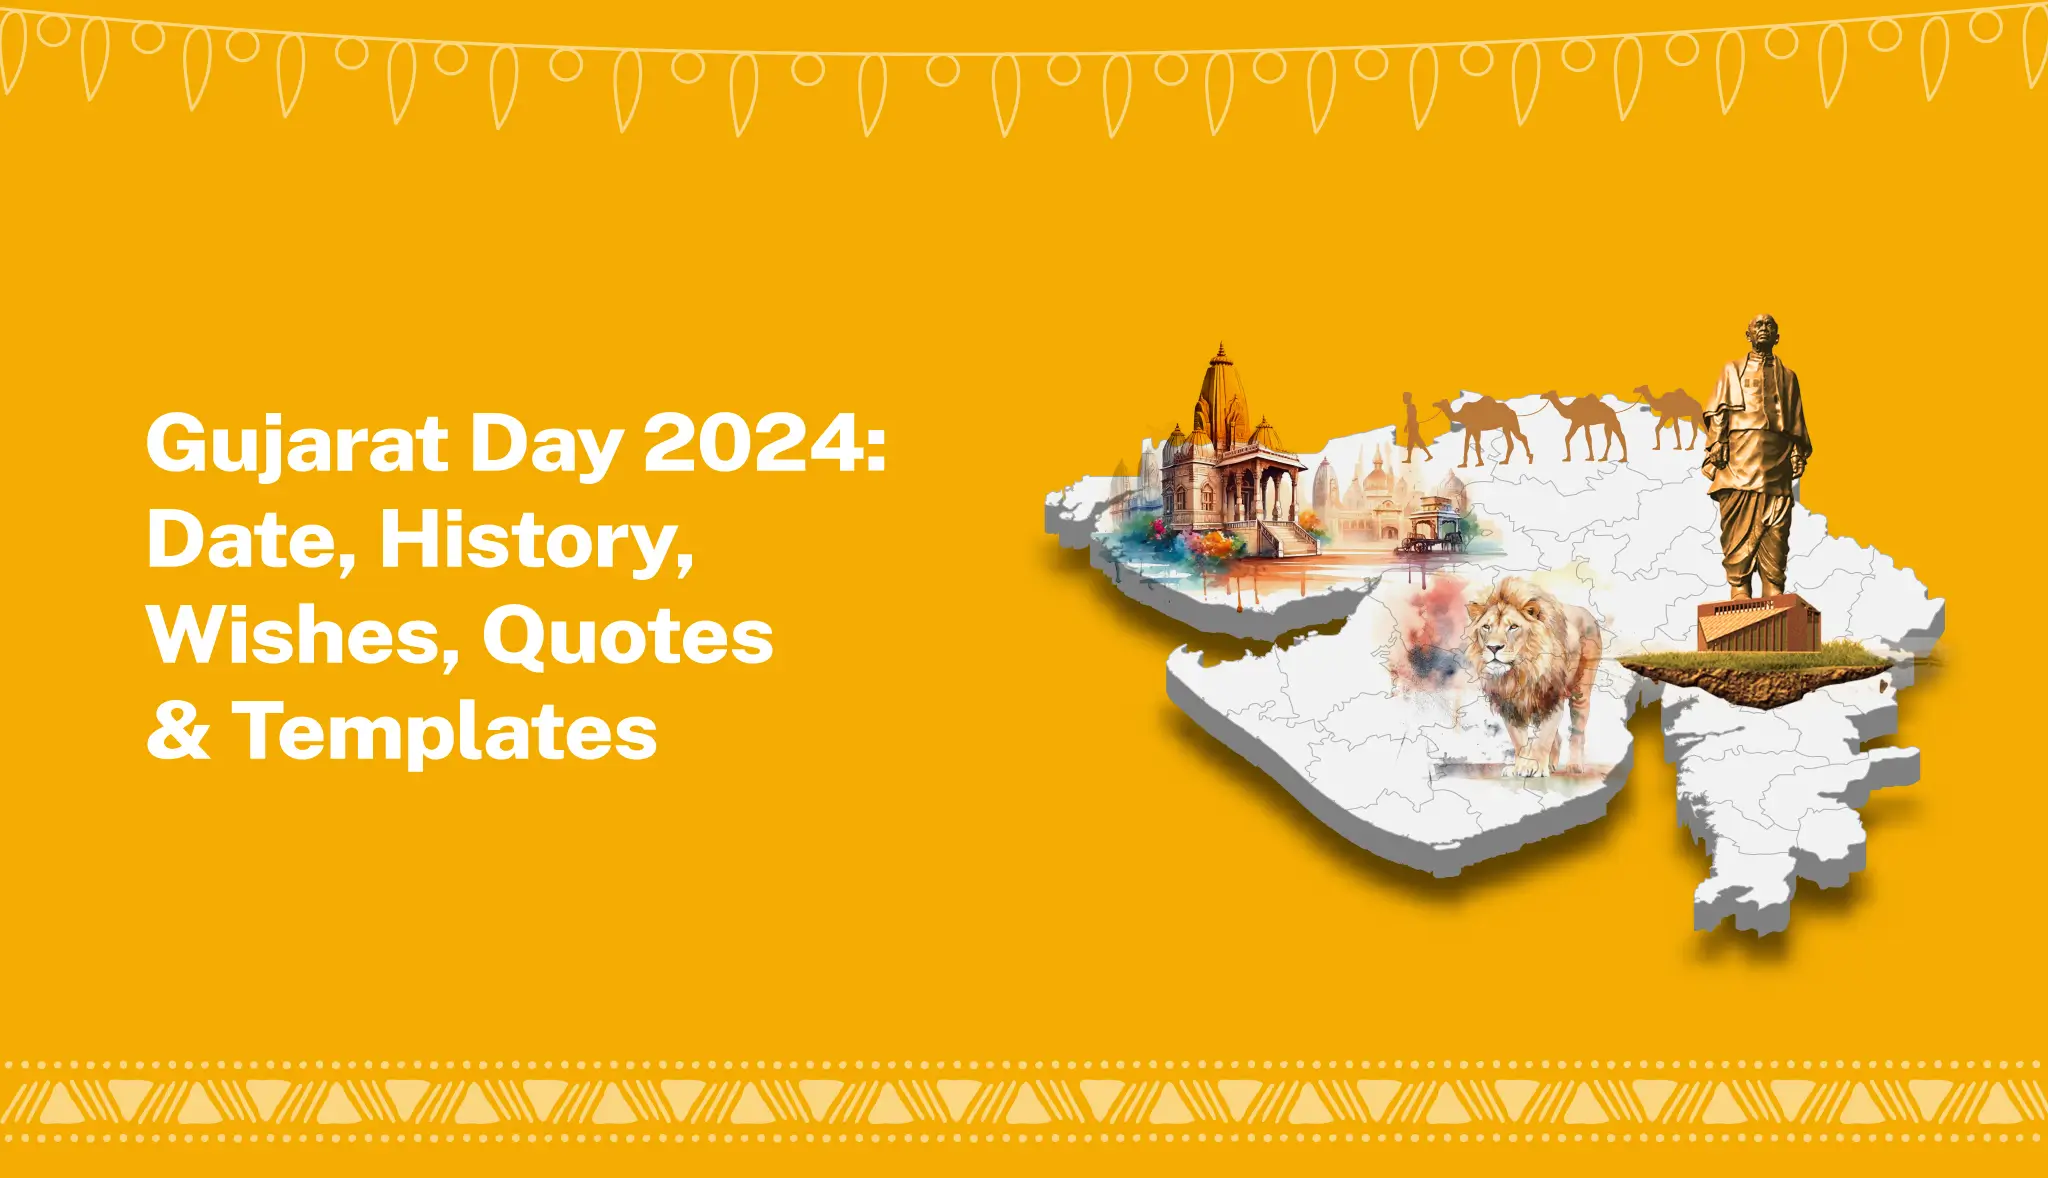 Gujarat Day 2024: Date, History, Wishes, Quotes & Templates - Postive